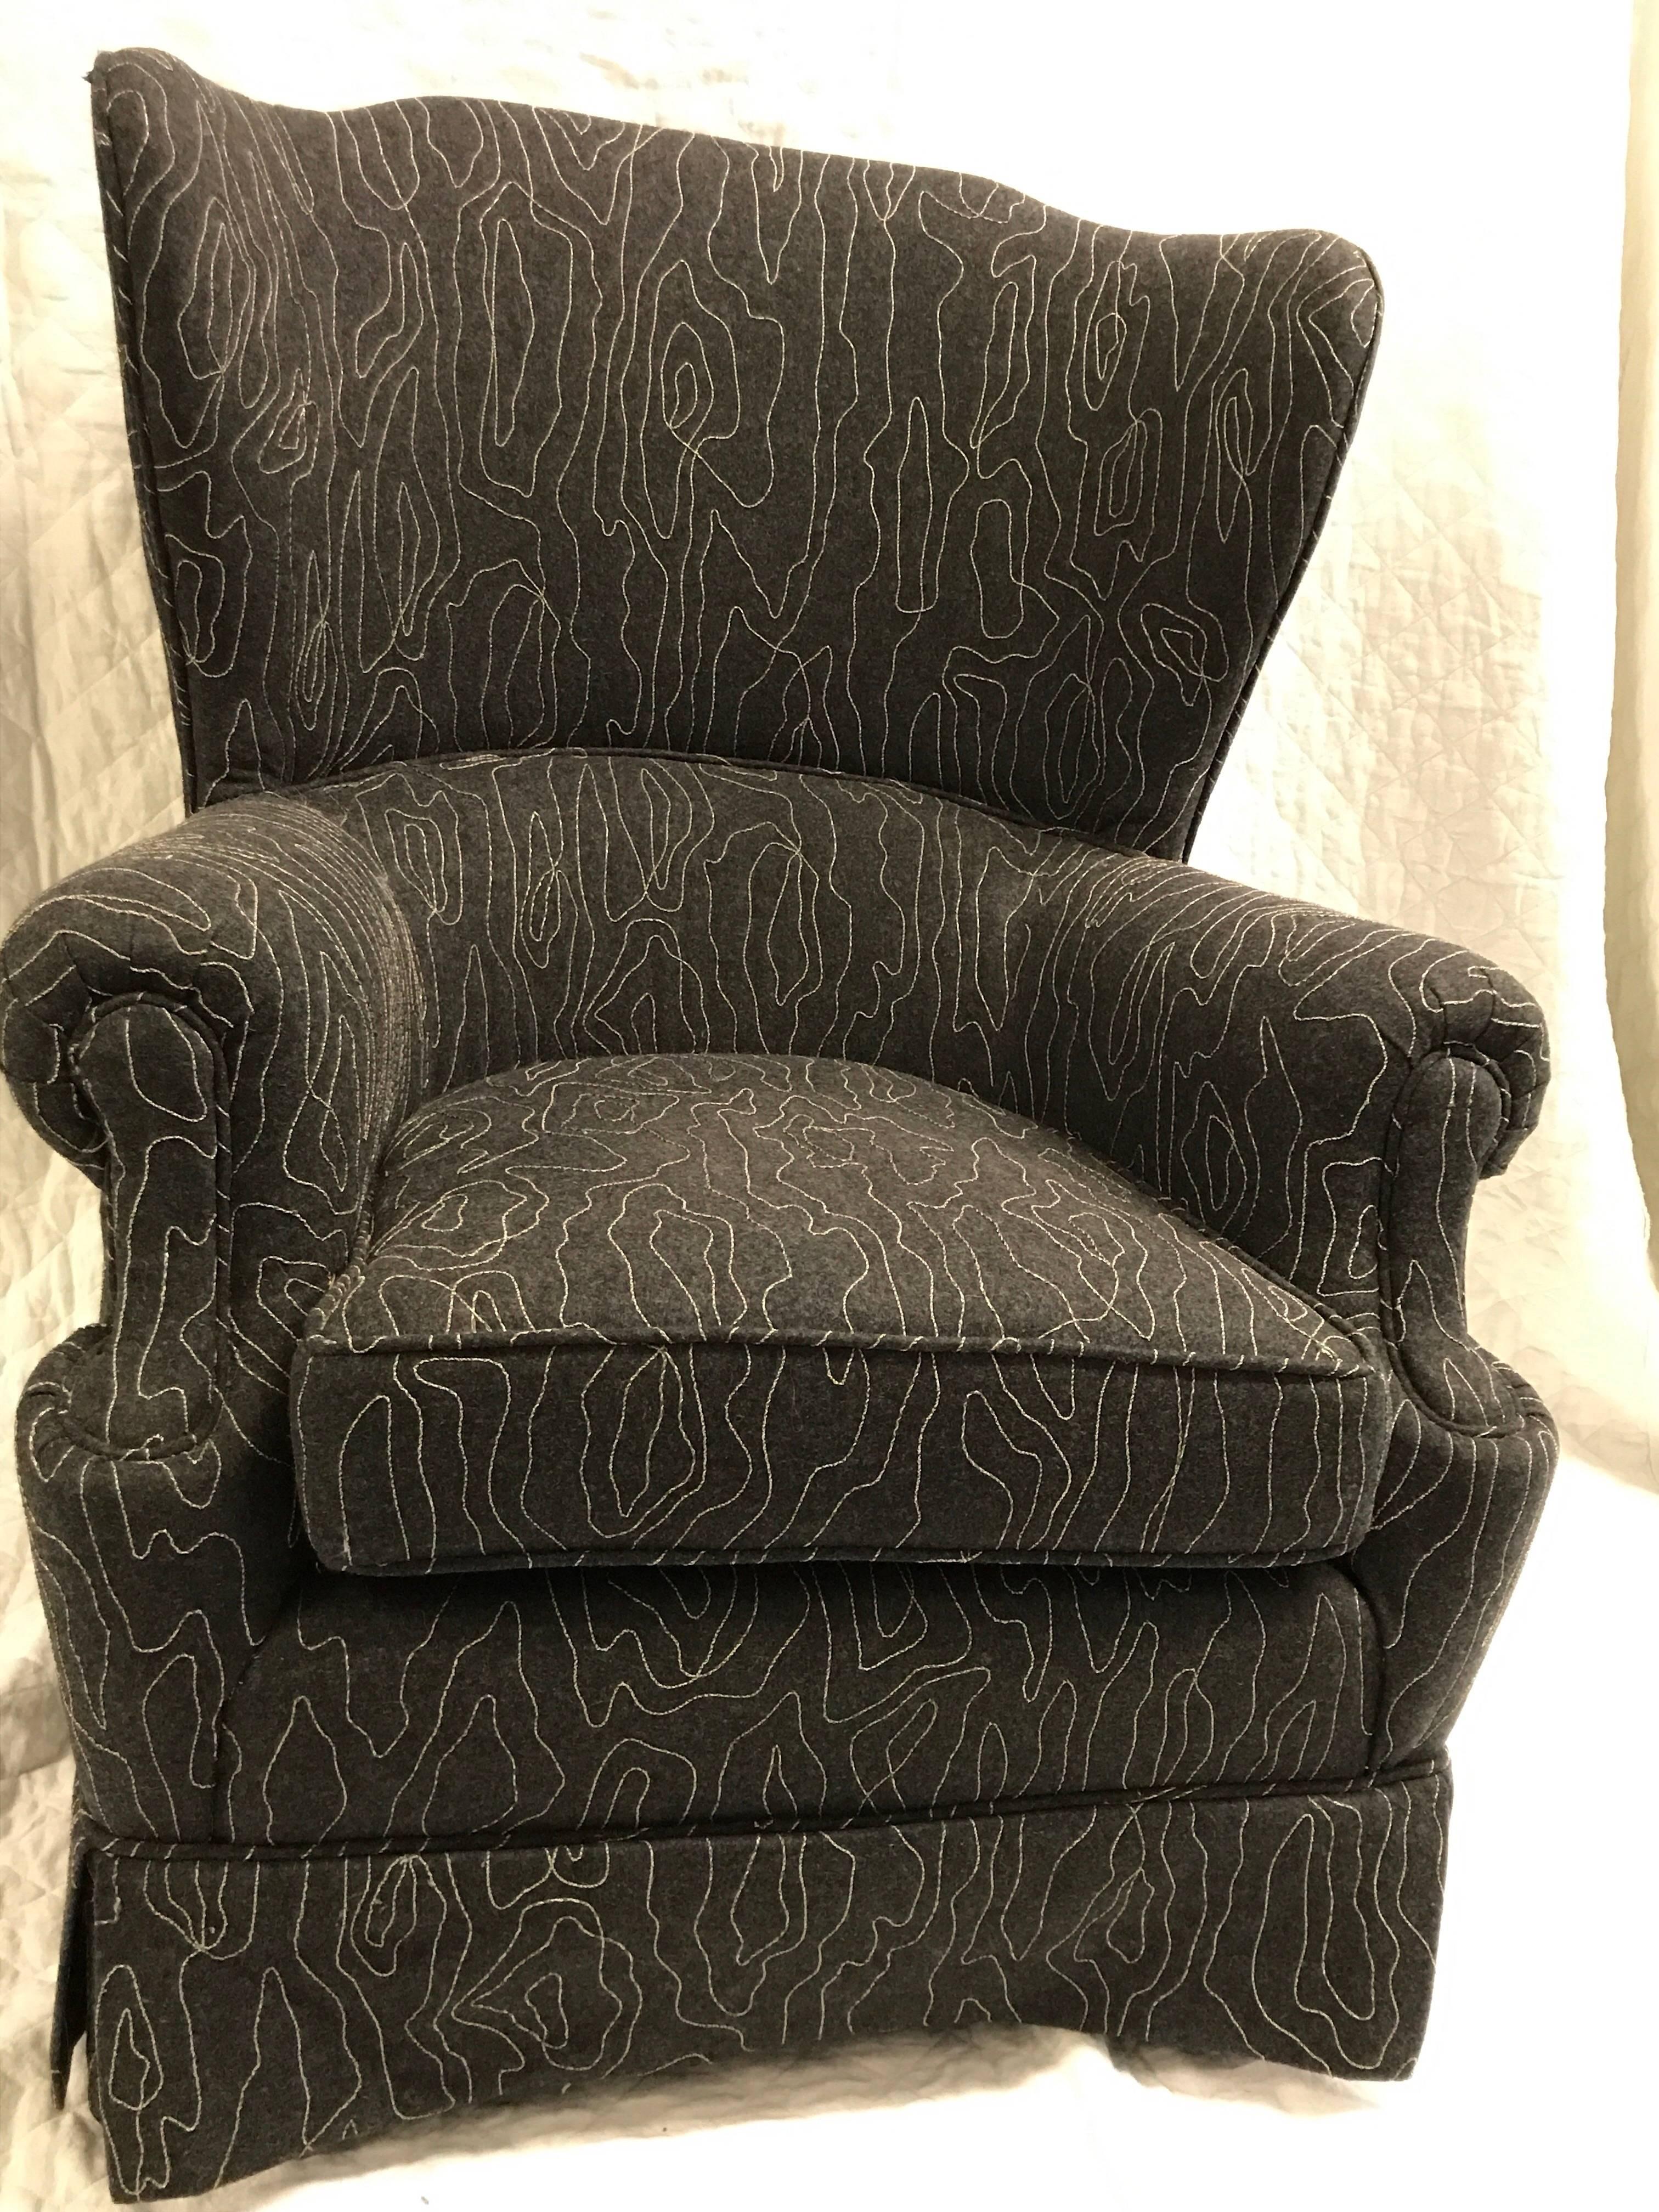 Early 20th century classic English library chair reupholstered in grey wool fabric.
Completely restored and upholstered.
 